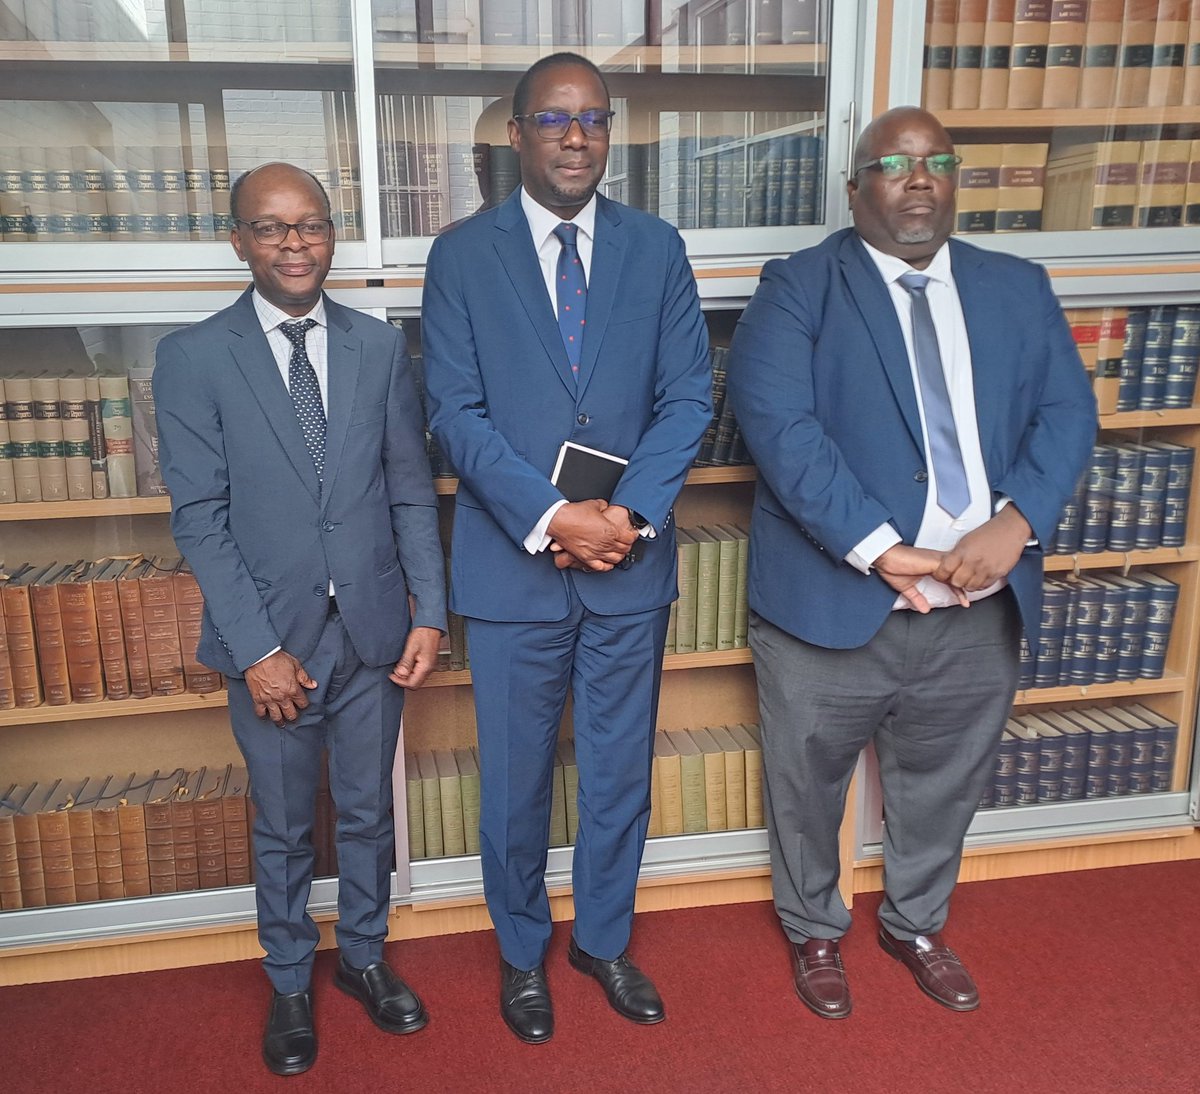 The Chief Justice of Mozambique, Honourable Mr Adelino Muchanga, the General Secretary of the Supreme Court of Mozambique, Mr Jeremias Manjate and three others who are in Zimbabwe for a benchmarking visit, today paid a courtesy call on the Chief Justice Honourable Mr Luke Malaba.